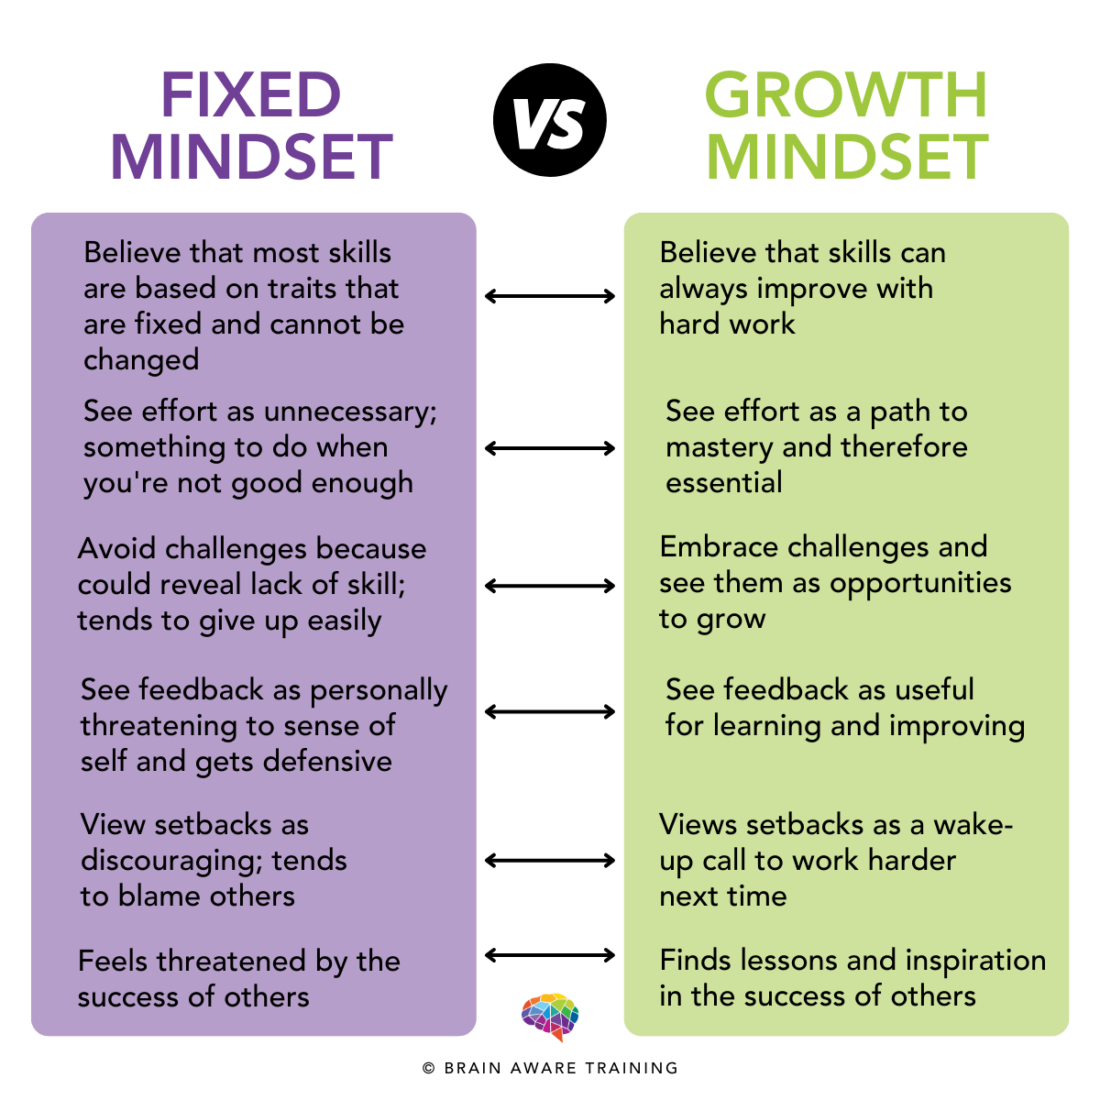 Growth Mindset Compared to a Fixed Mindset